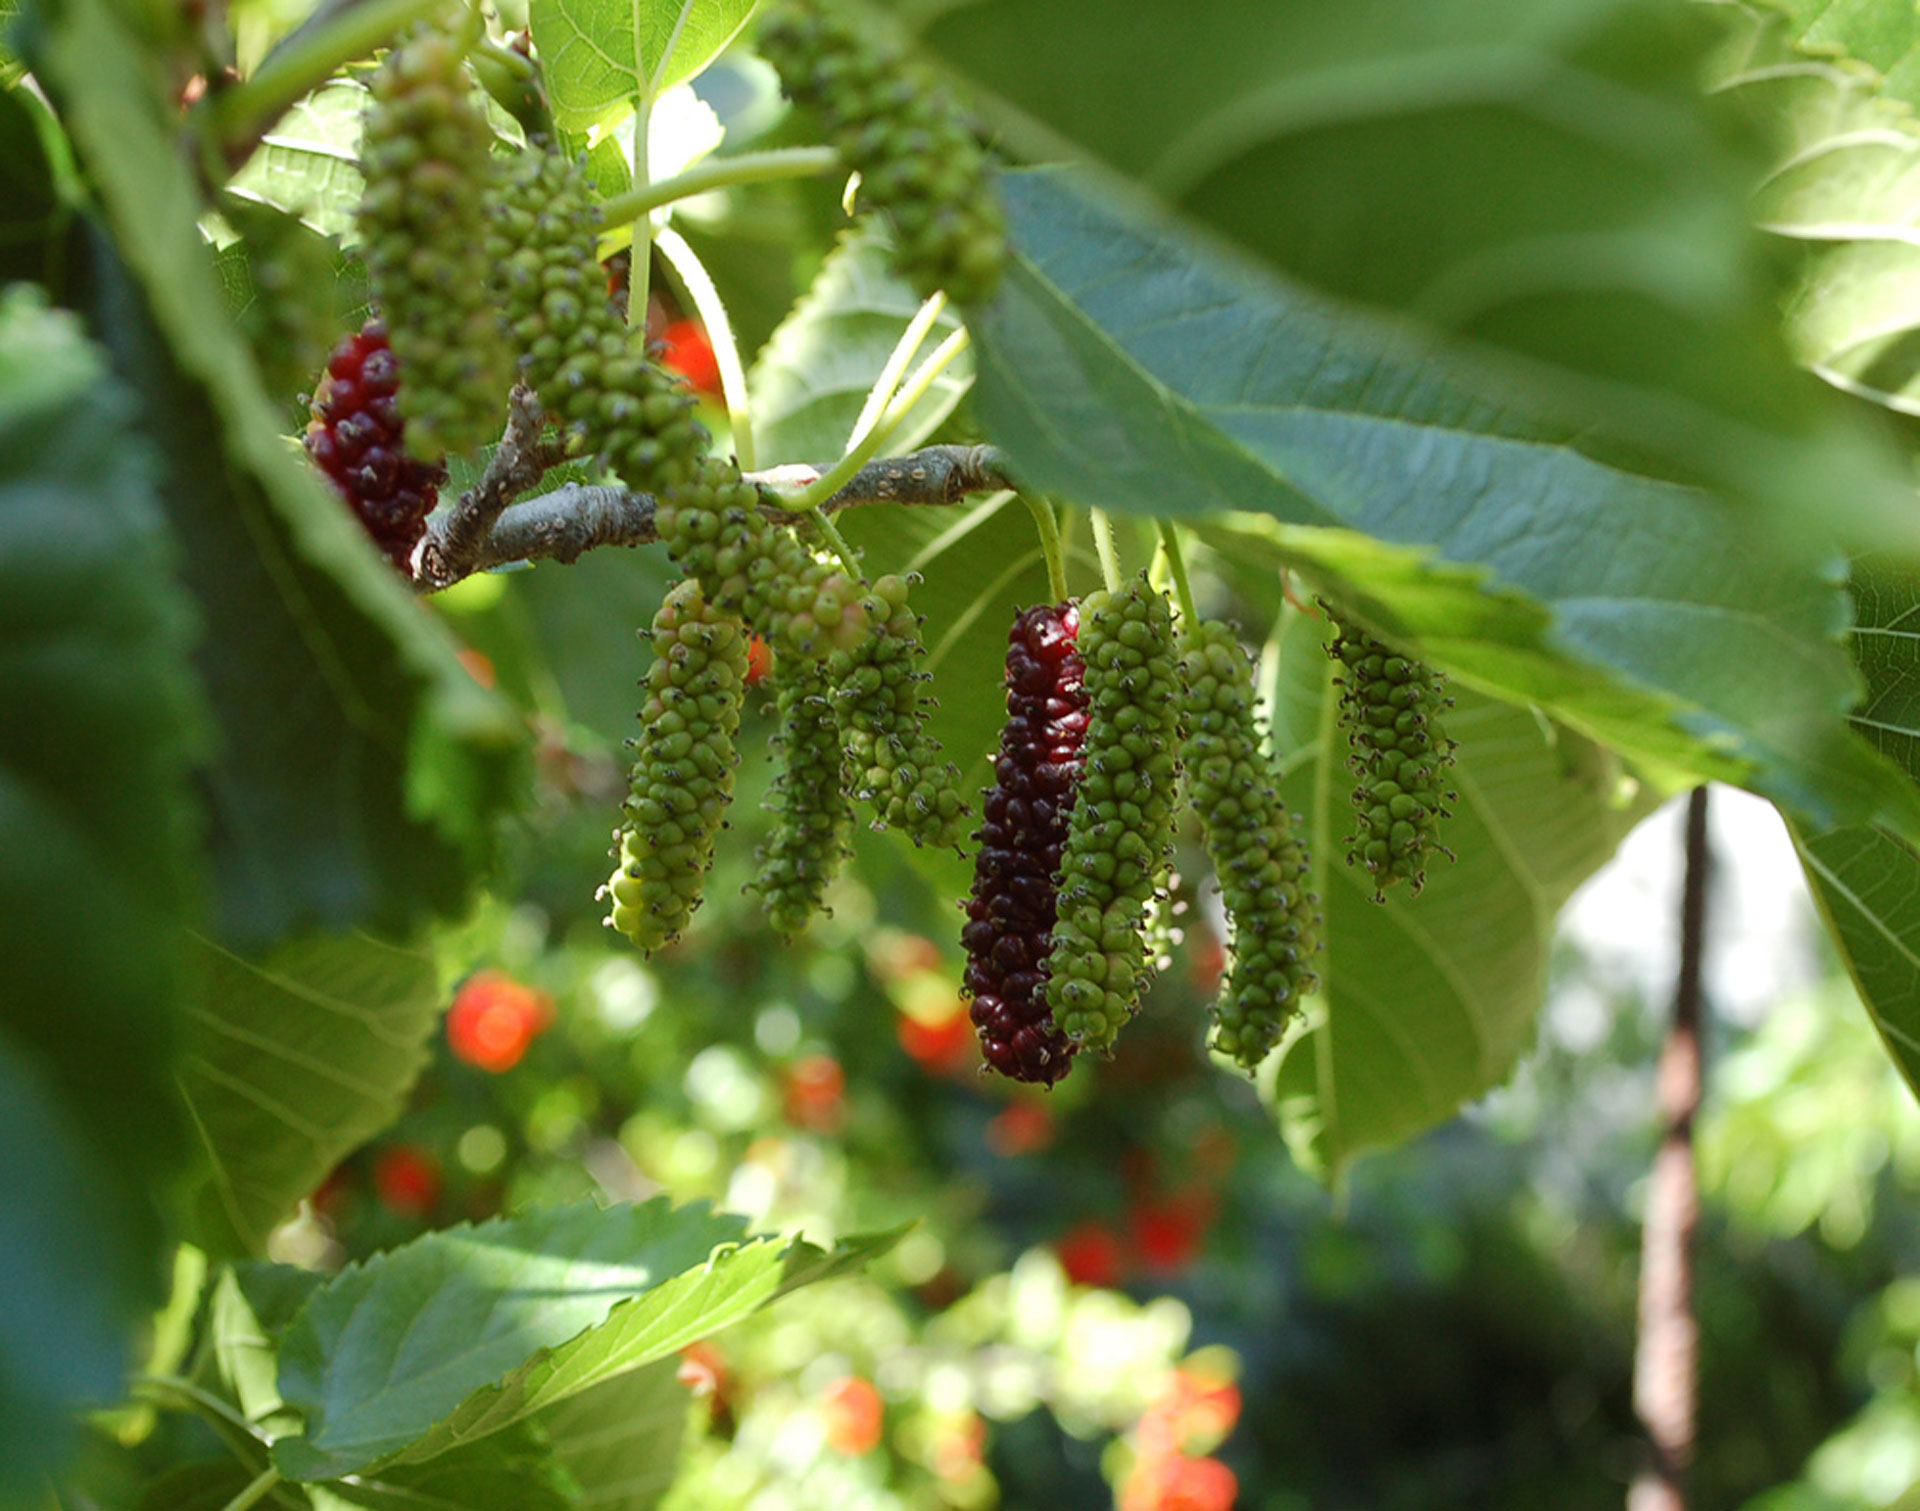 The longer Pakistan variety of mulberry can go to five inches and is toothsome, less moist and offers rounded flavors with hints of banana and apple.